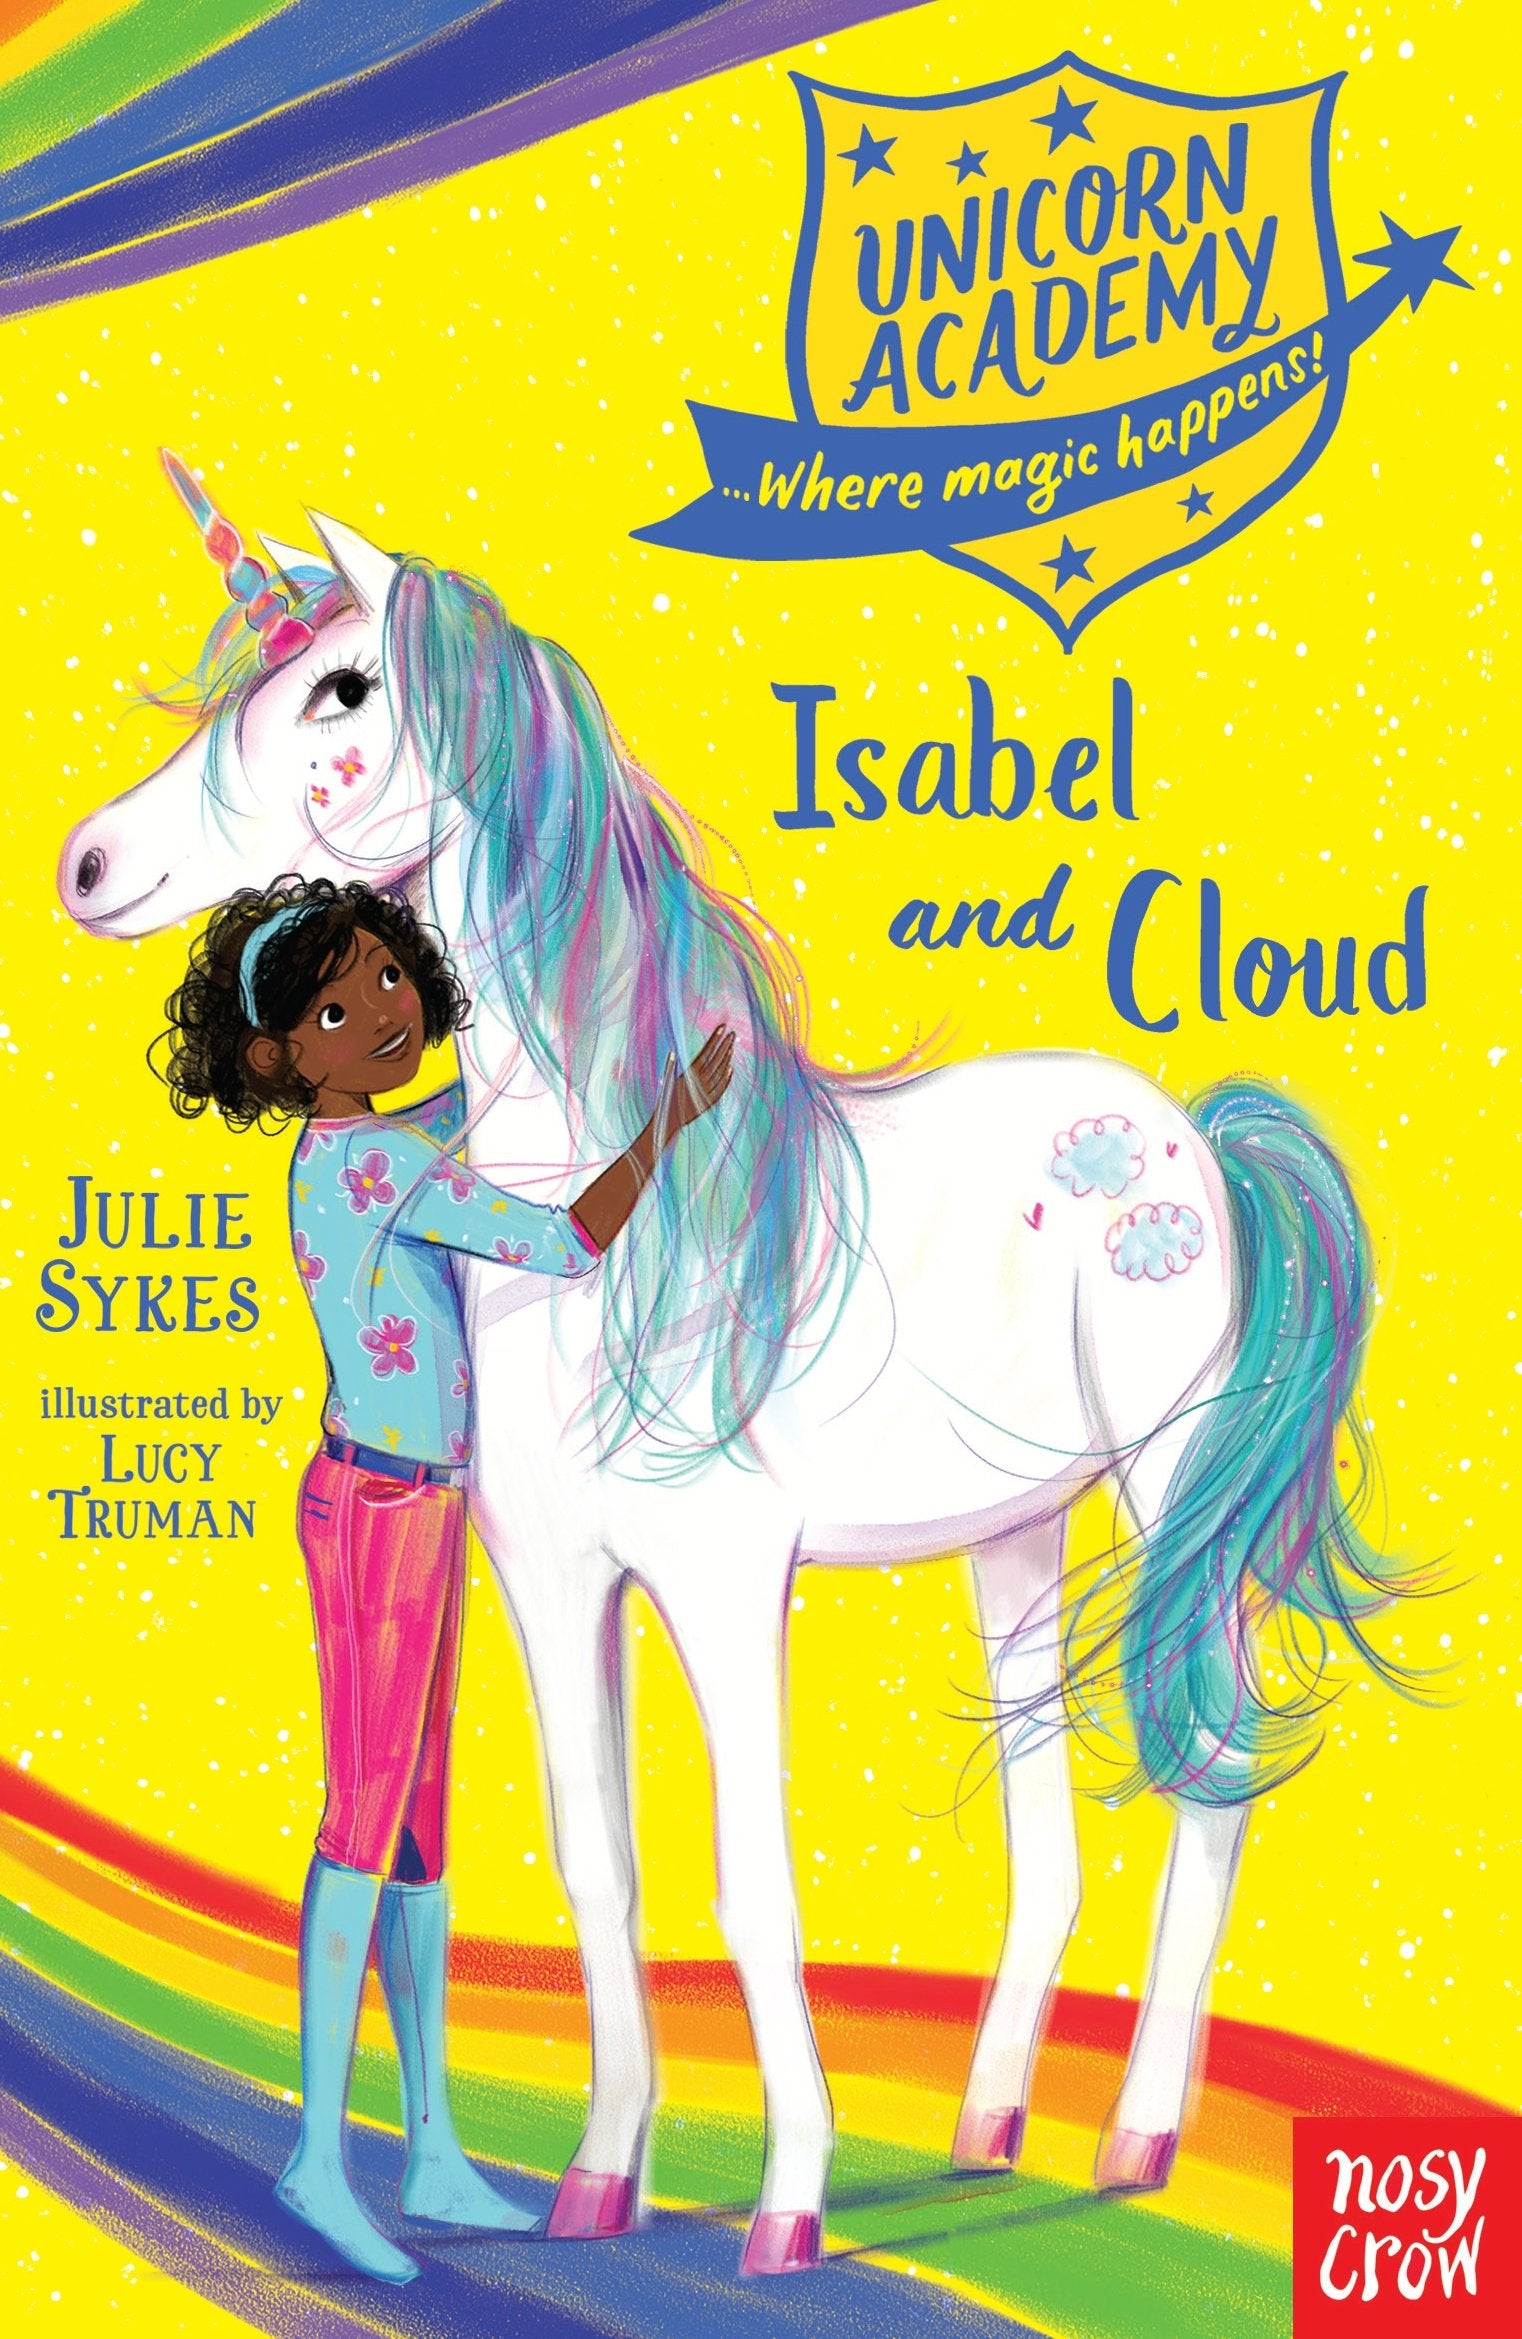 Unicorn Academy: Isabel and Cloud by Julie Sykes at Chapters online bookstore Pakistan